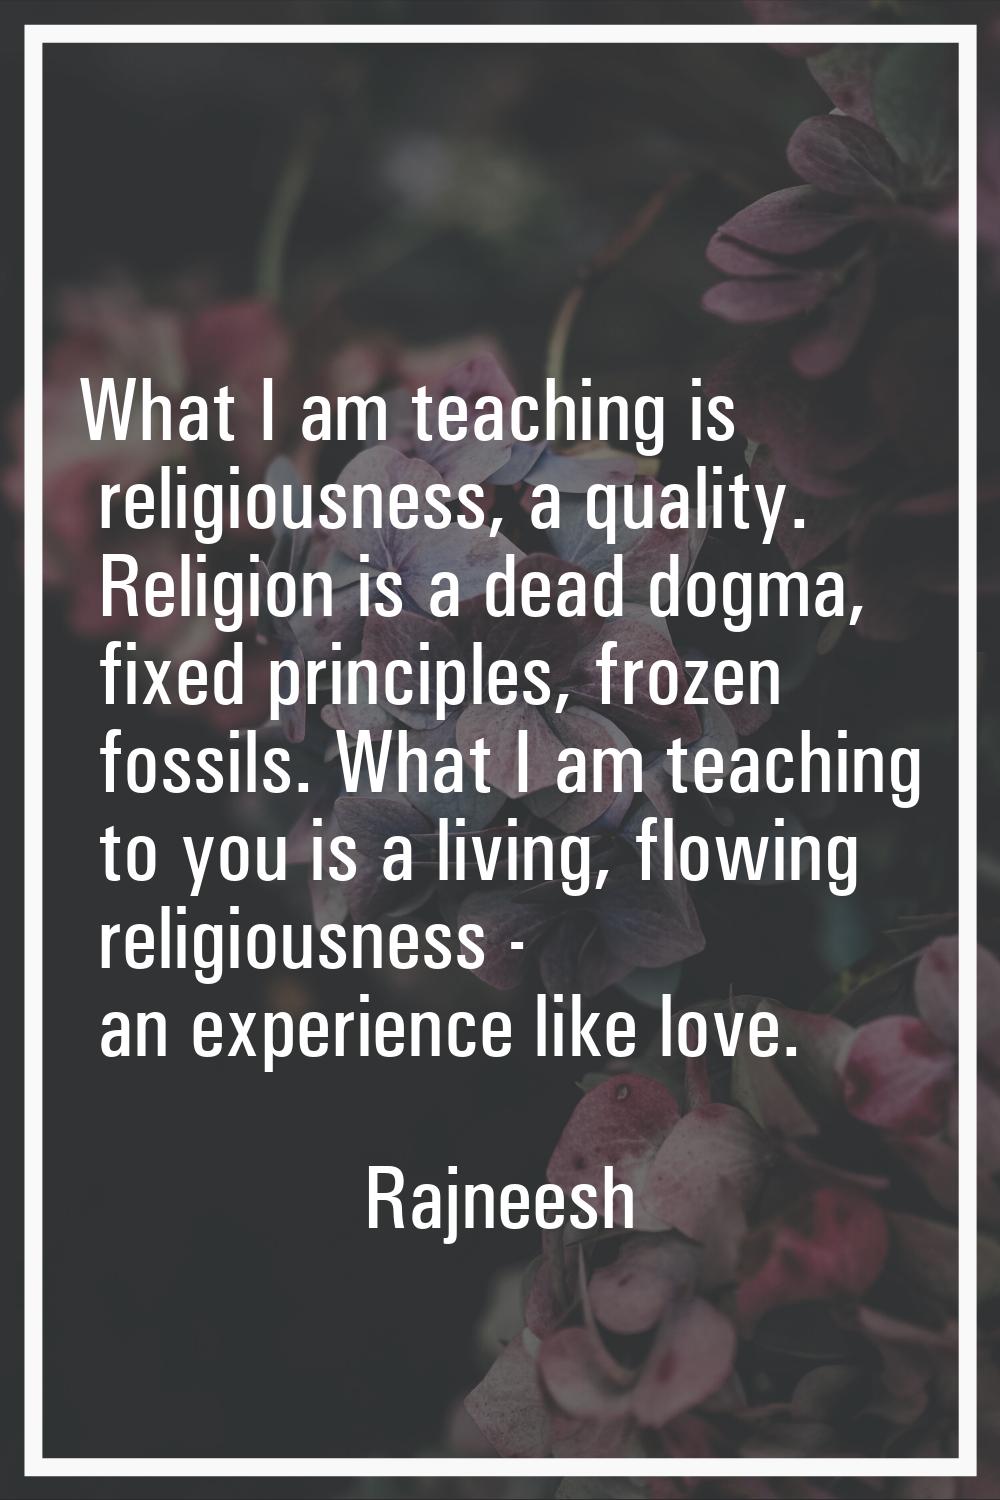 What I am teaching is religiousness, a quality. Religion is a dead dogma, fixed principles, frozen 